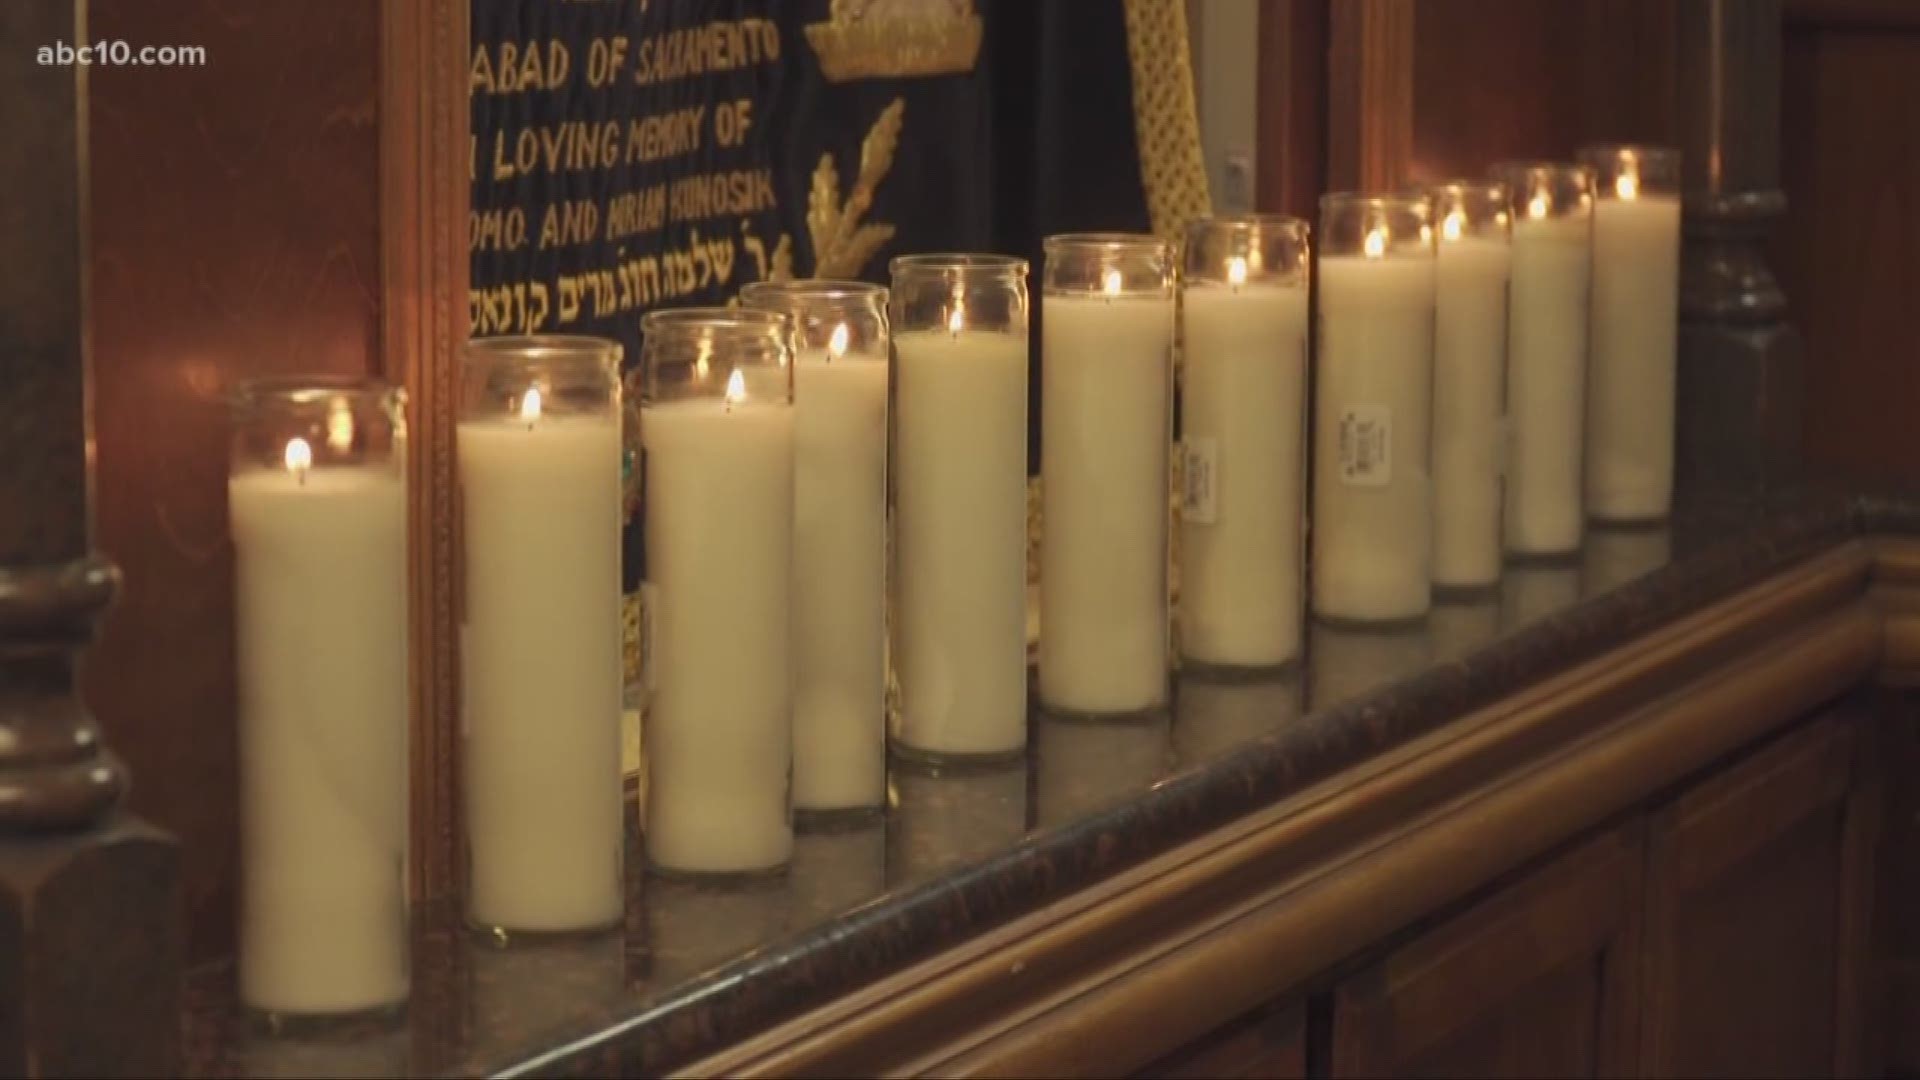 More than 40 people gathered at the Chabad of Sacramento to remember the victims in the attack on a Synagogue in Pittsburgh.